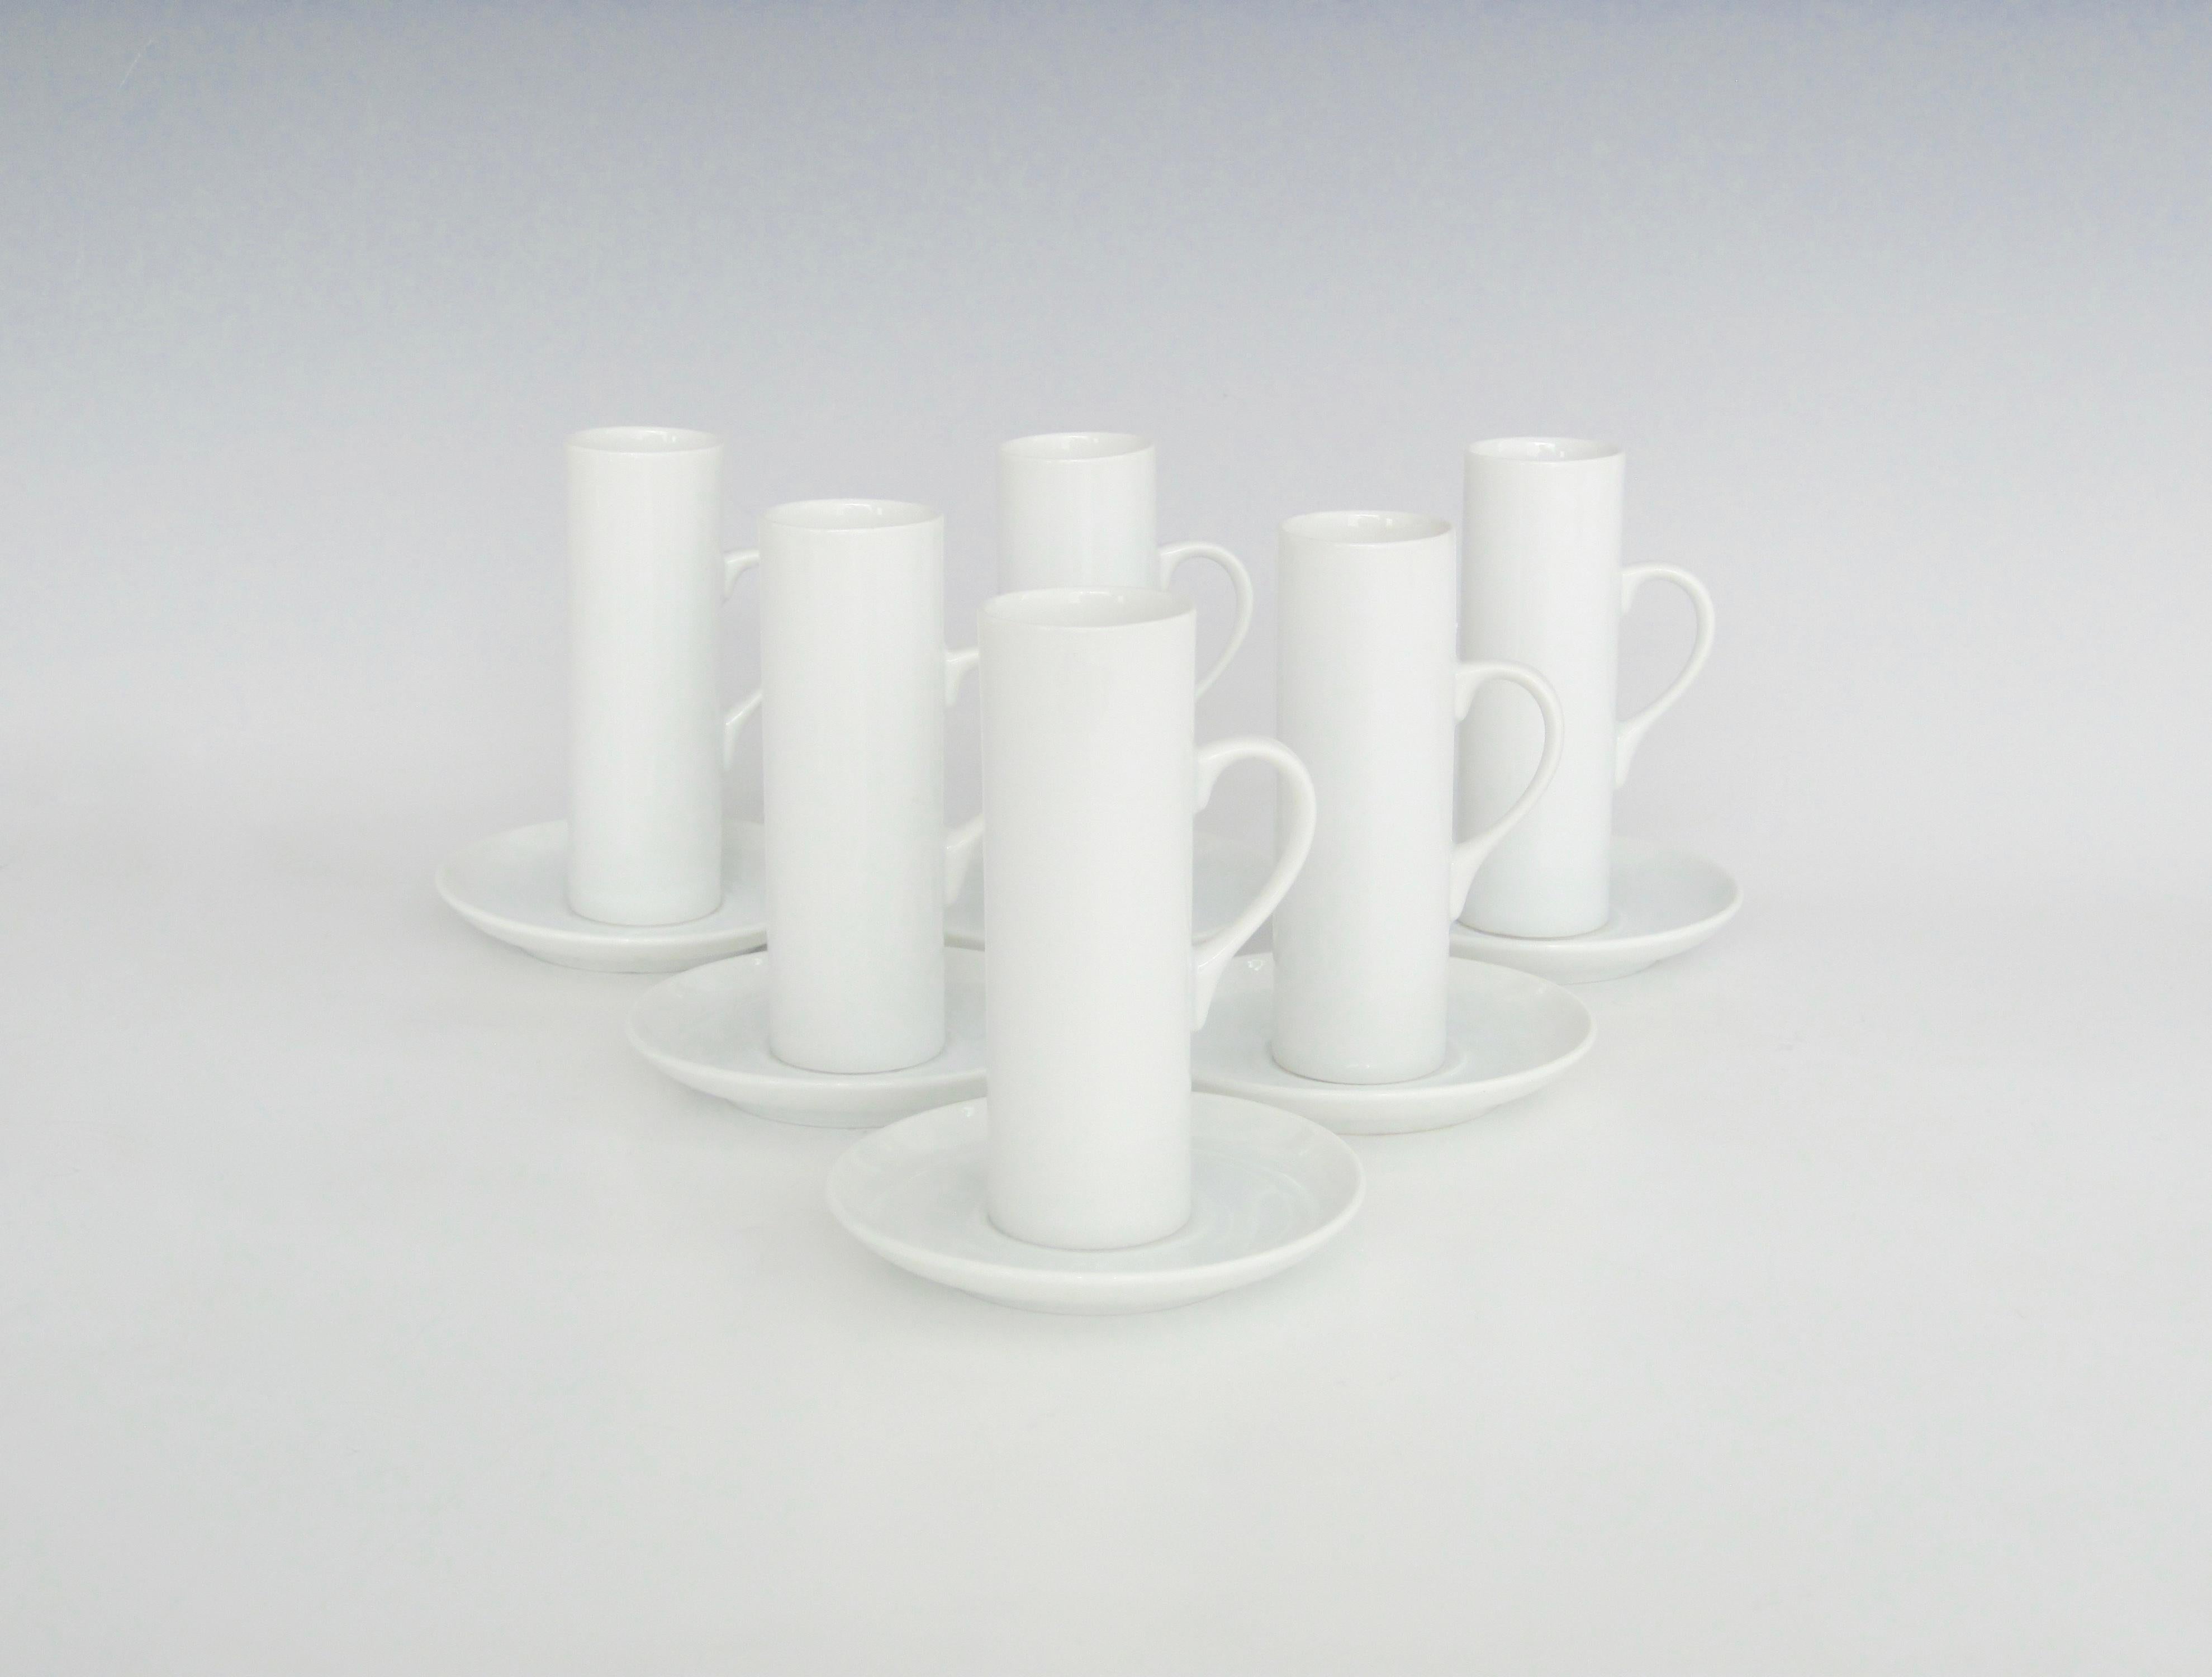 A set of 6 demitasse/espresso cups with saucers in porcelain. Designed by Lagardo Tackett for Schmid in the 1960s. An elegant design with the original box.
Cups 4